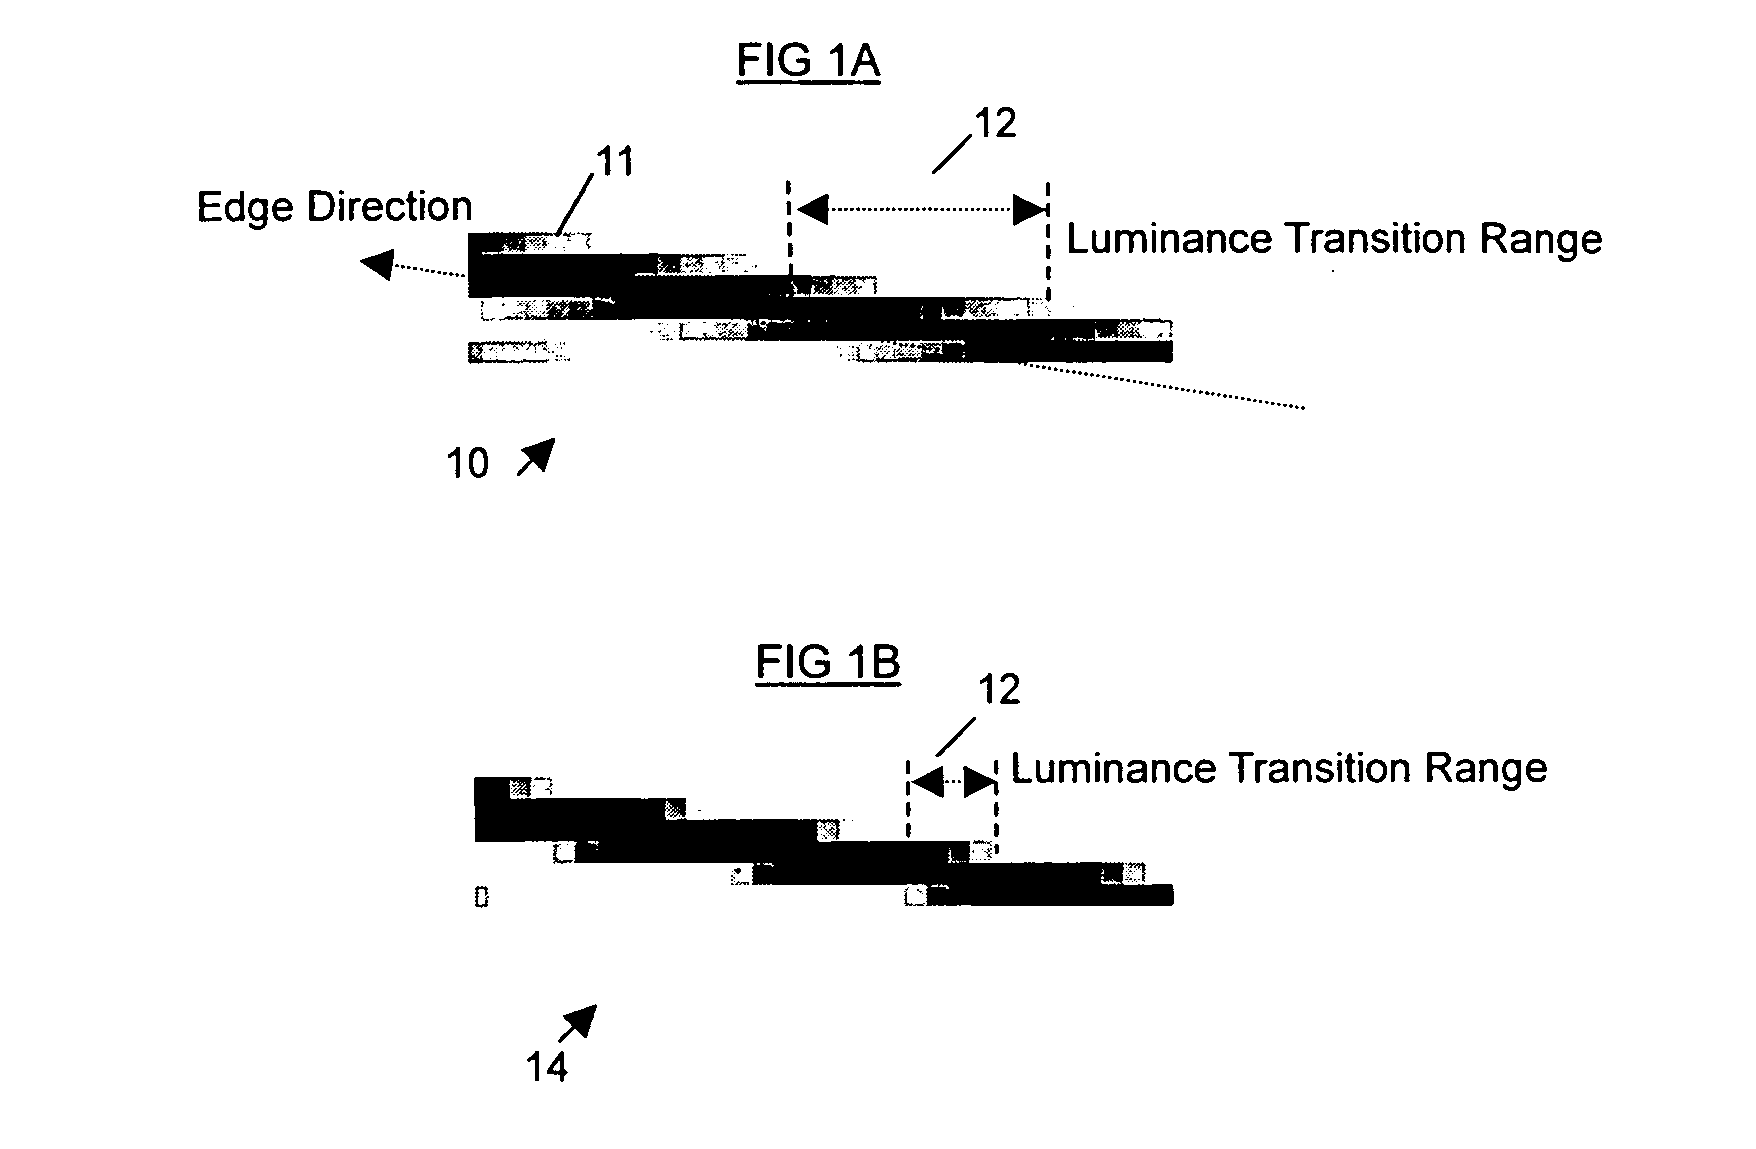 Method and apparatus for detecting the location and luminance transition range of slant image edges